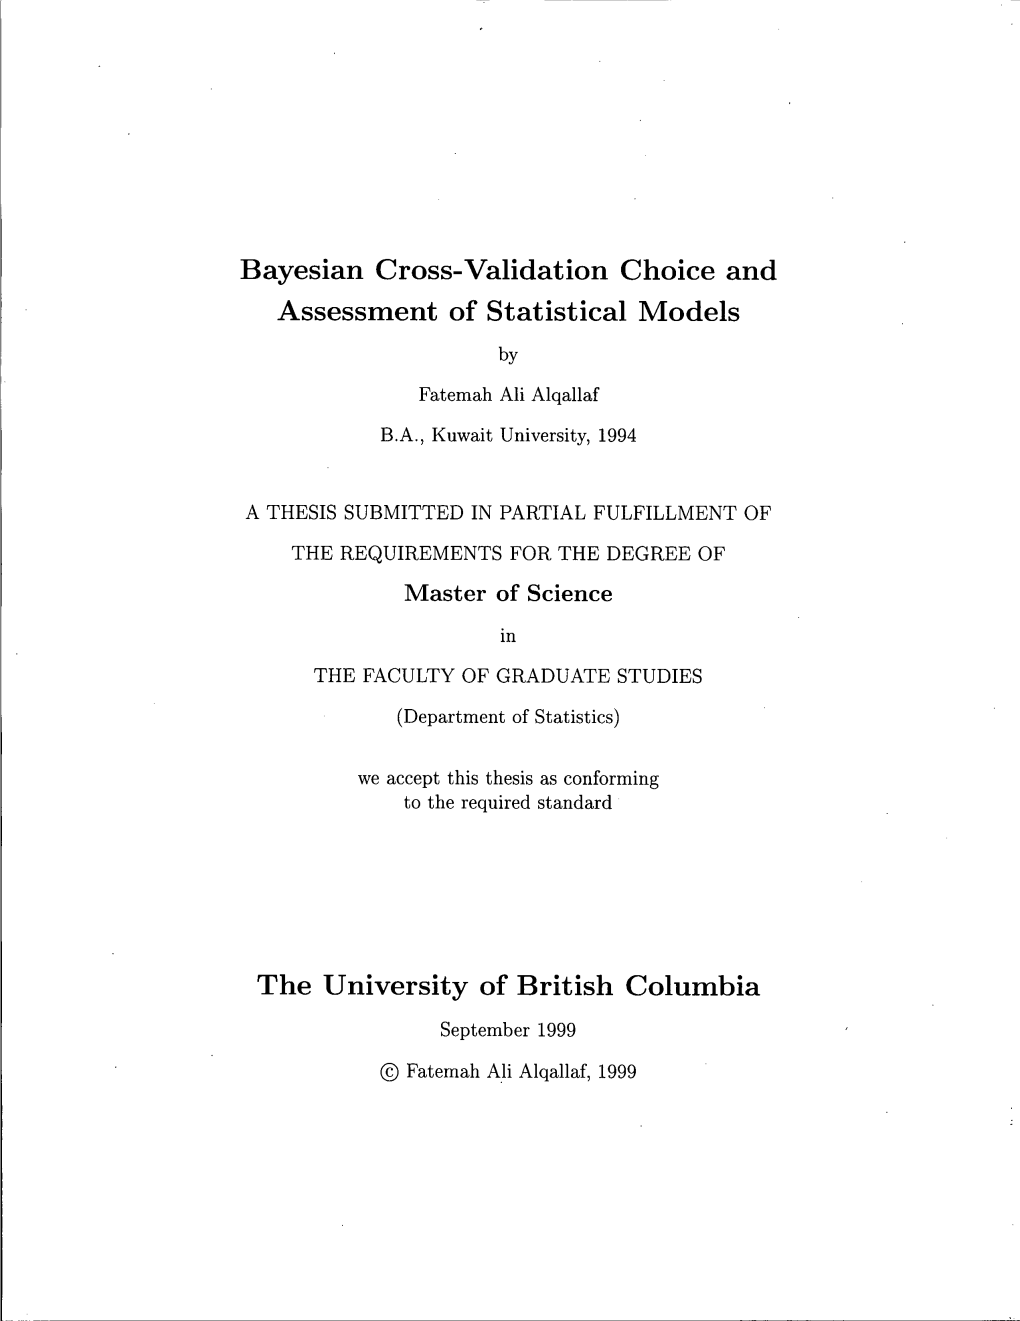 Bayesian Cross-Validation Choice and Assessment of Statistical Models